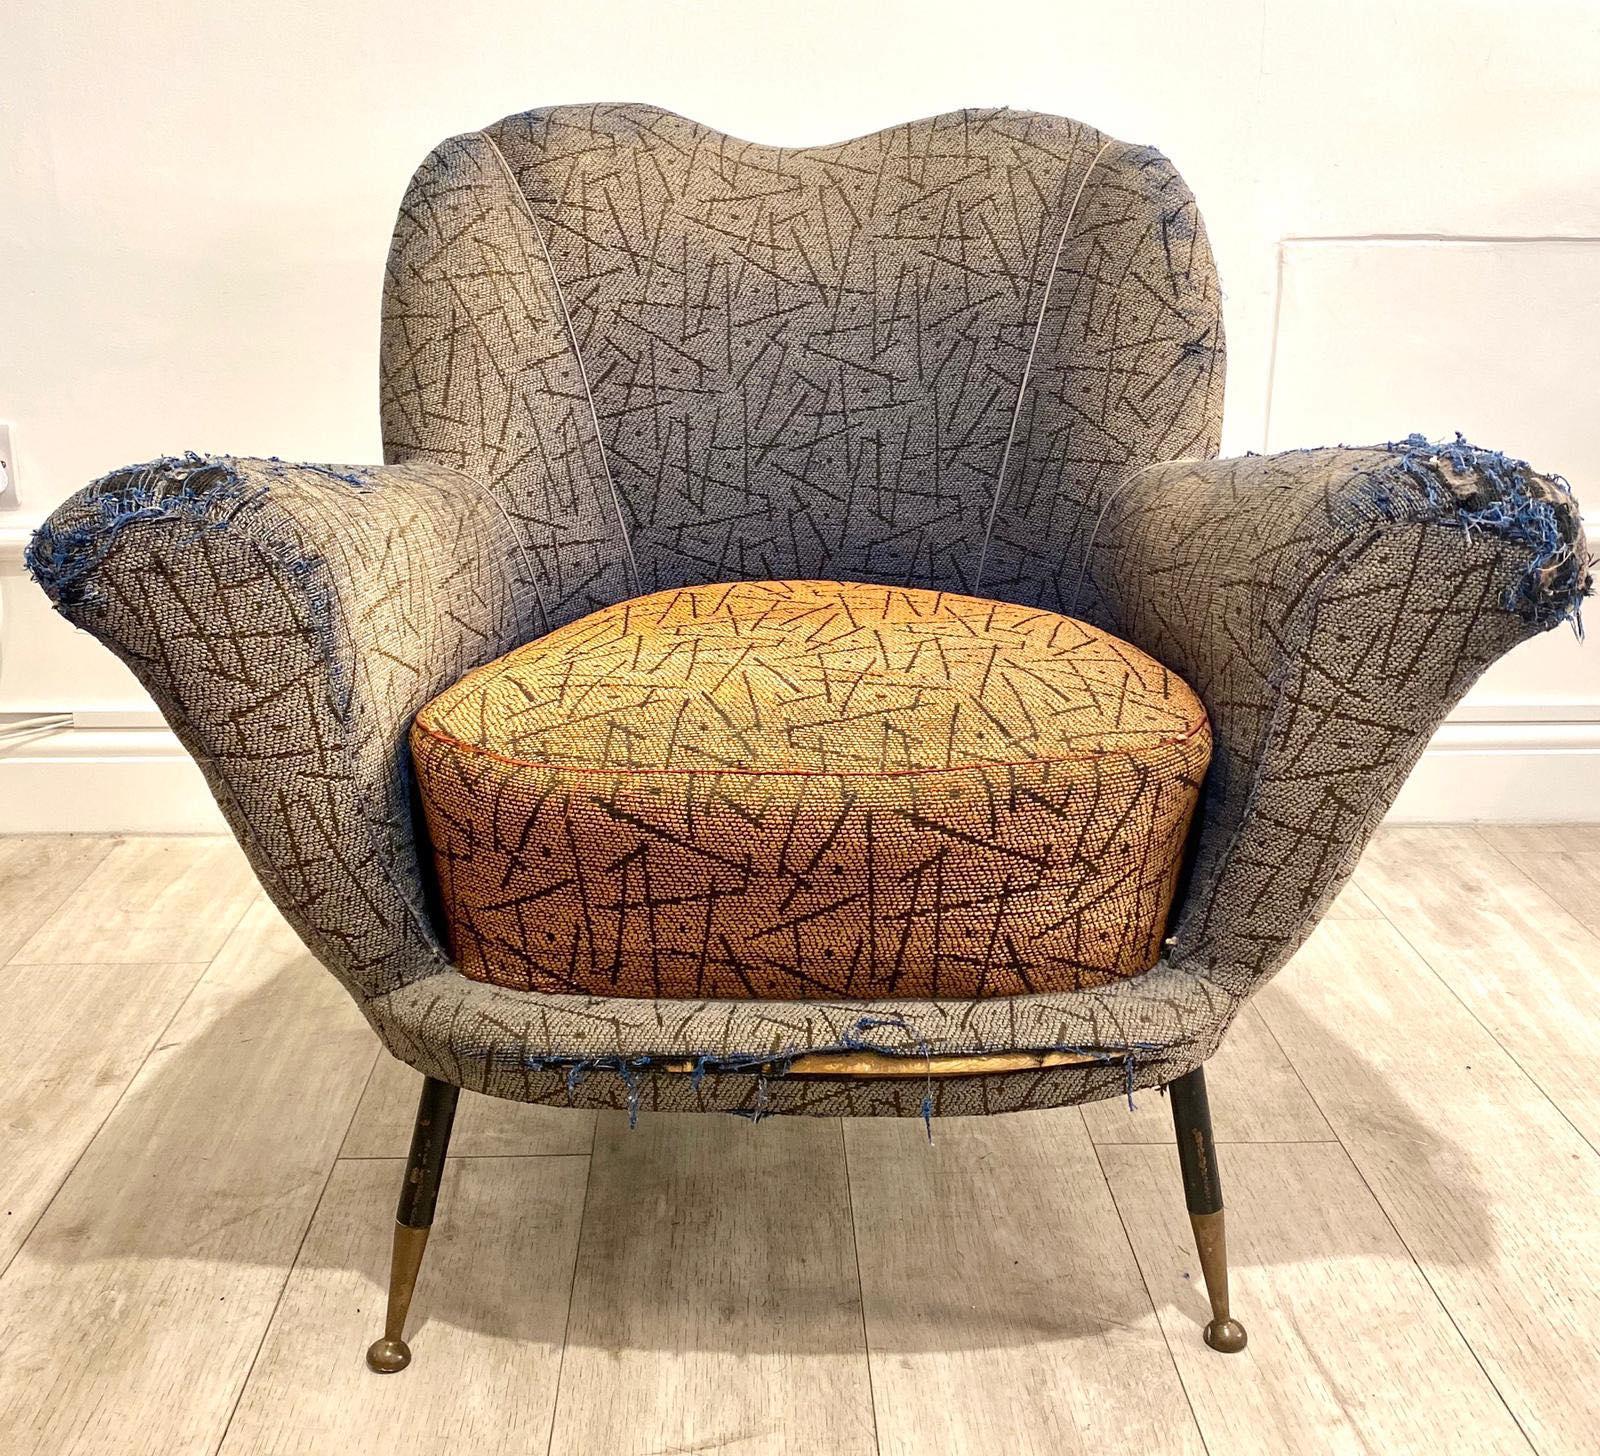 Very cool original 1950s Italian armchair by Poltrona Frau in its original upholstery set on elegant tall and thin black steel legs with brass feet caps. 

Really nice and unusual shape with lovely proportions. 

Would be perfect for